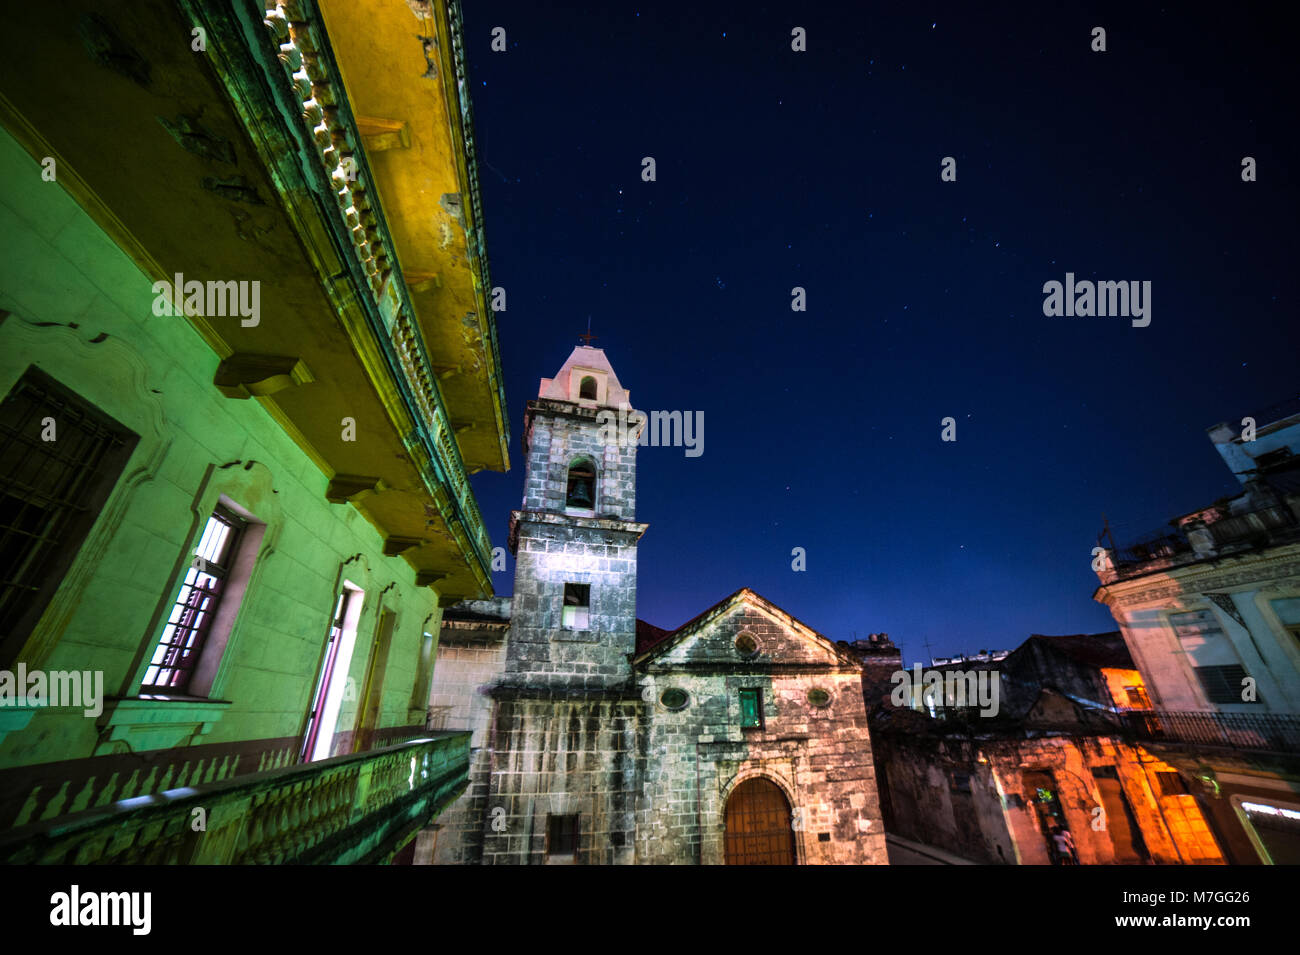 A 17th-century Spanish colonial church lit up under the night sky in Old Havana, Cuba Stock Photo